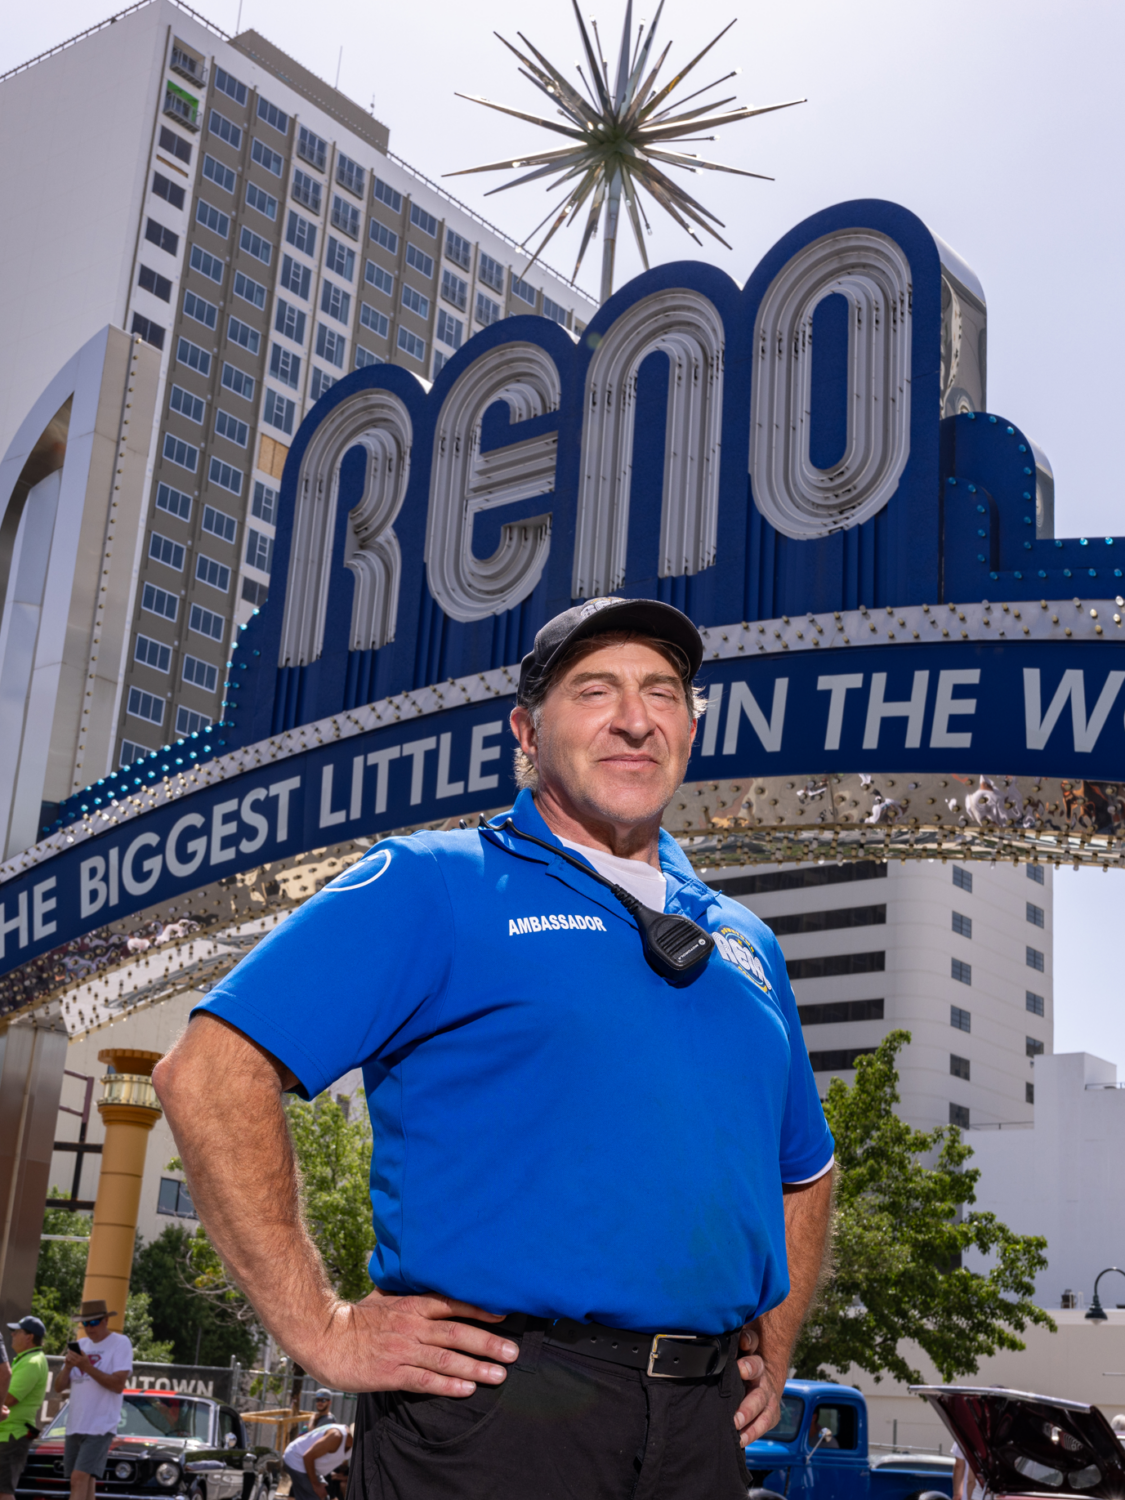 DRP Ambassador in front of the Reno Arch